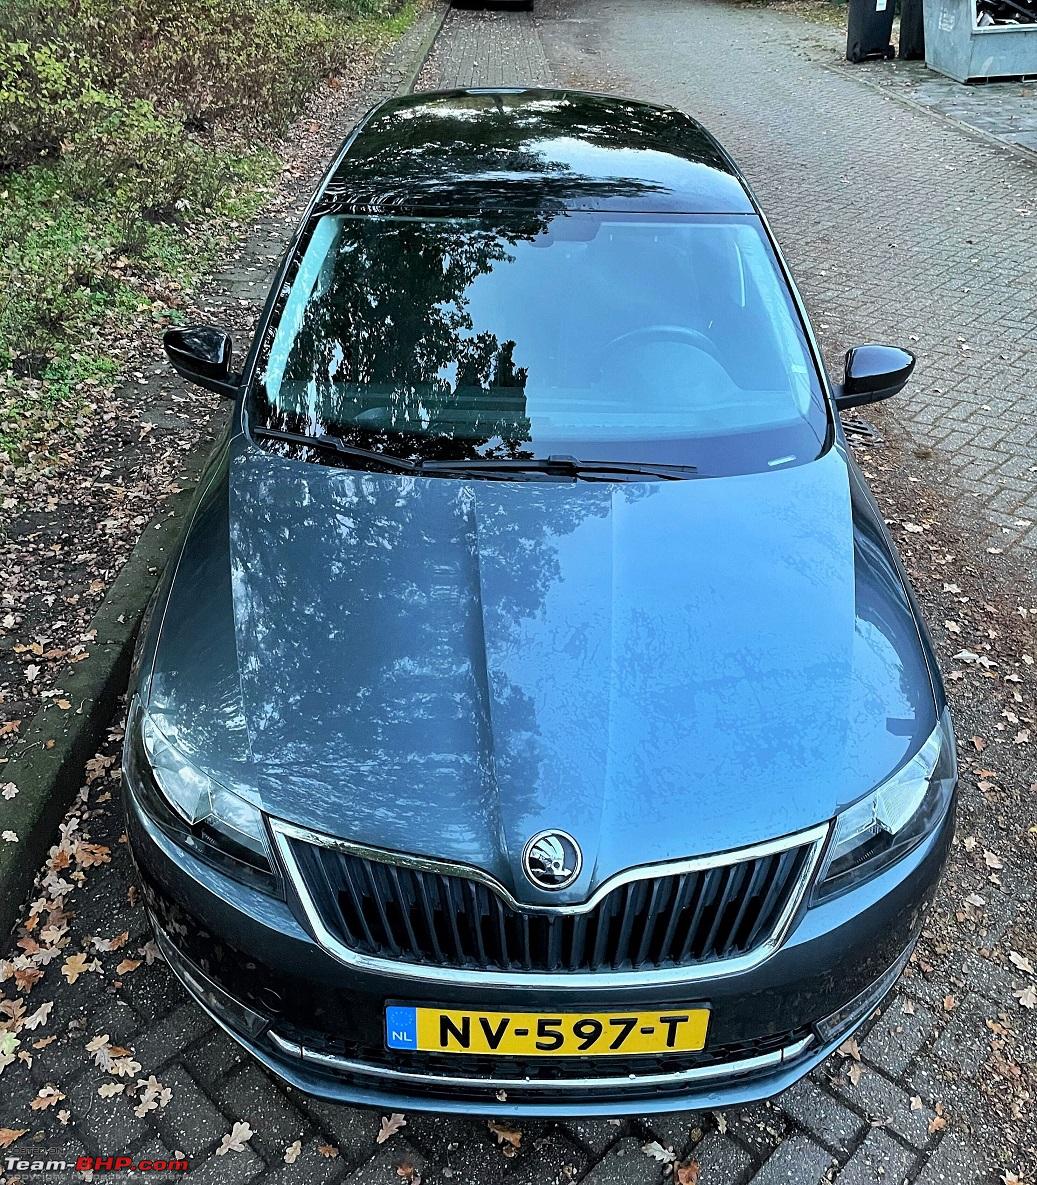 My experience owning a Skoda Rapid Spaceback in the Netherlands